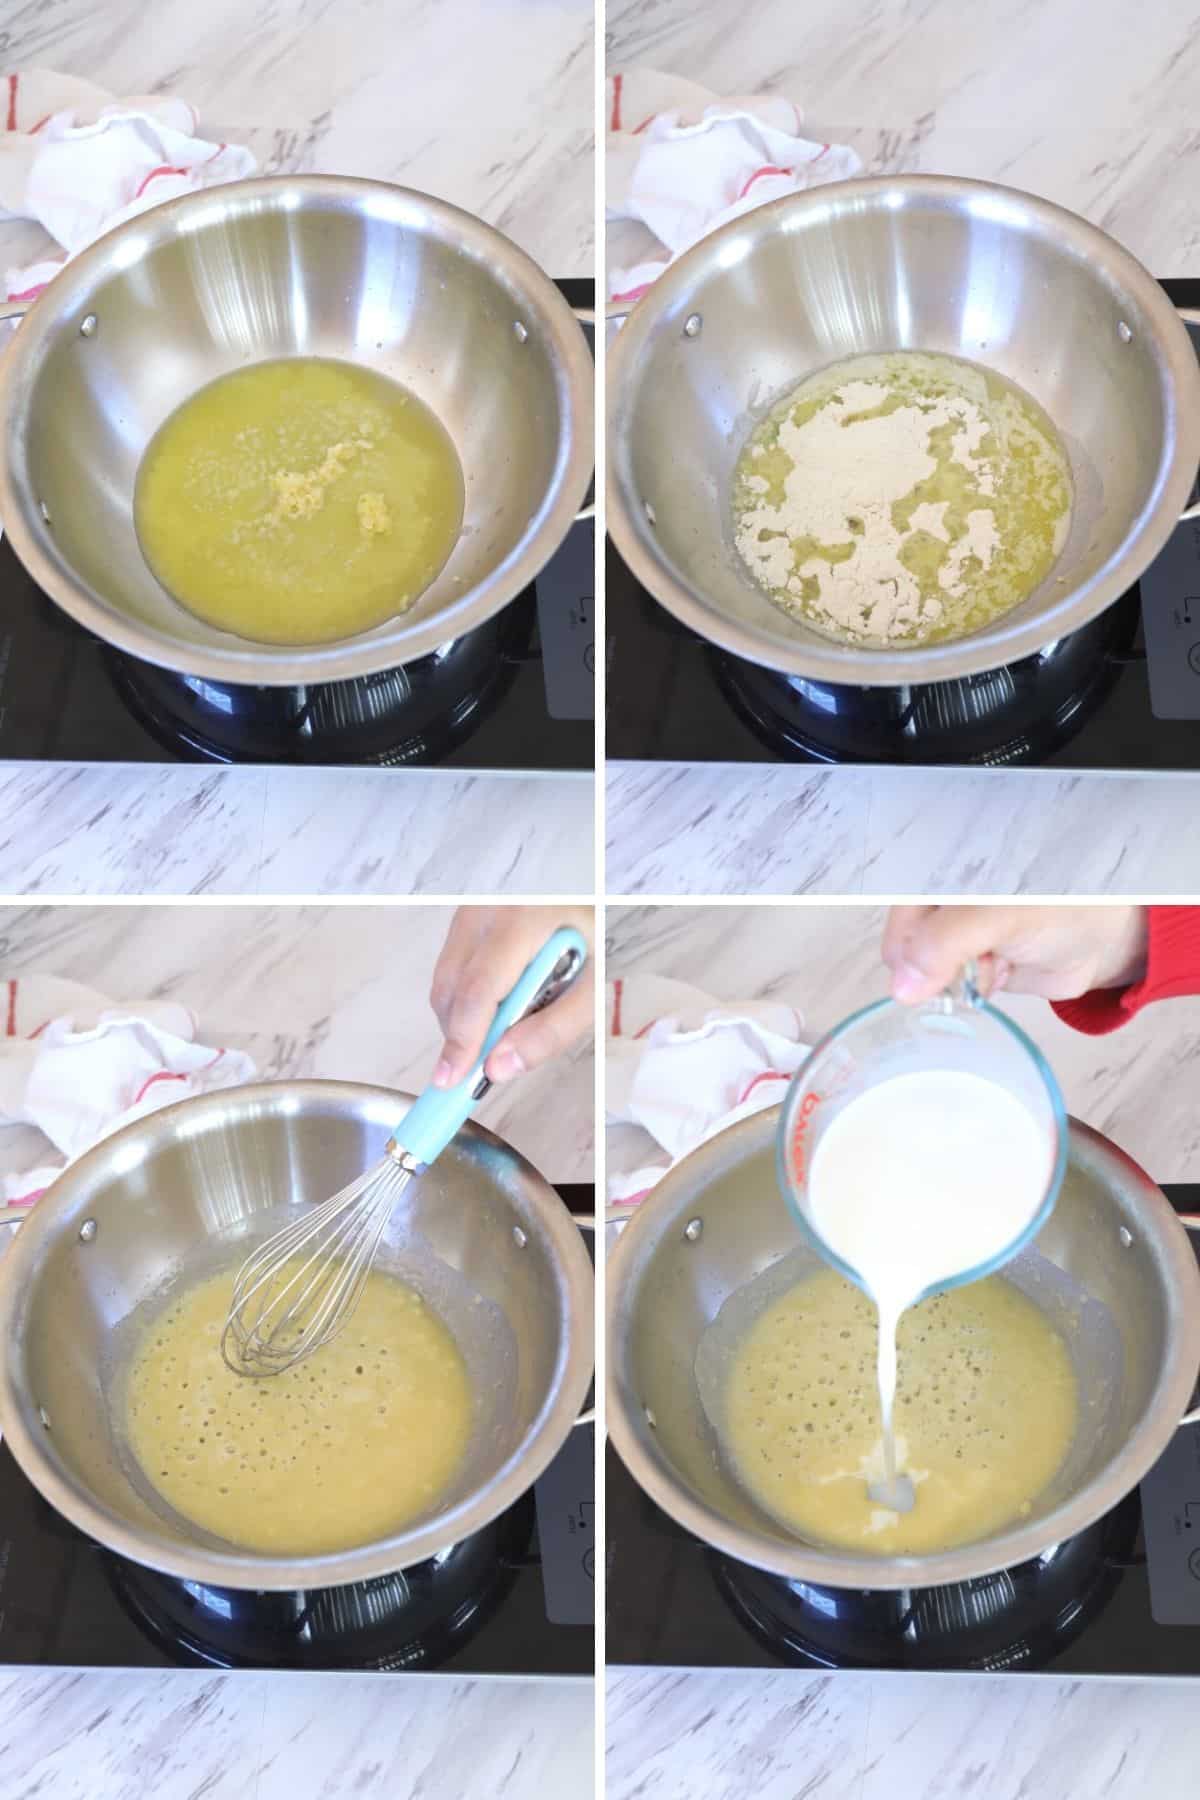 A collage of images showing how to make alfredo sauce.